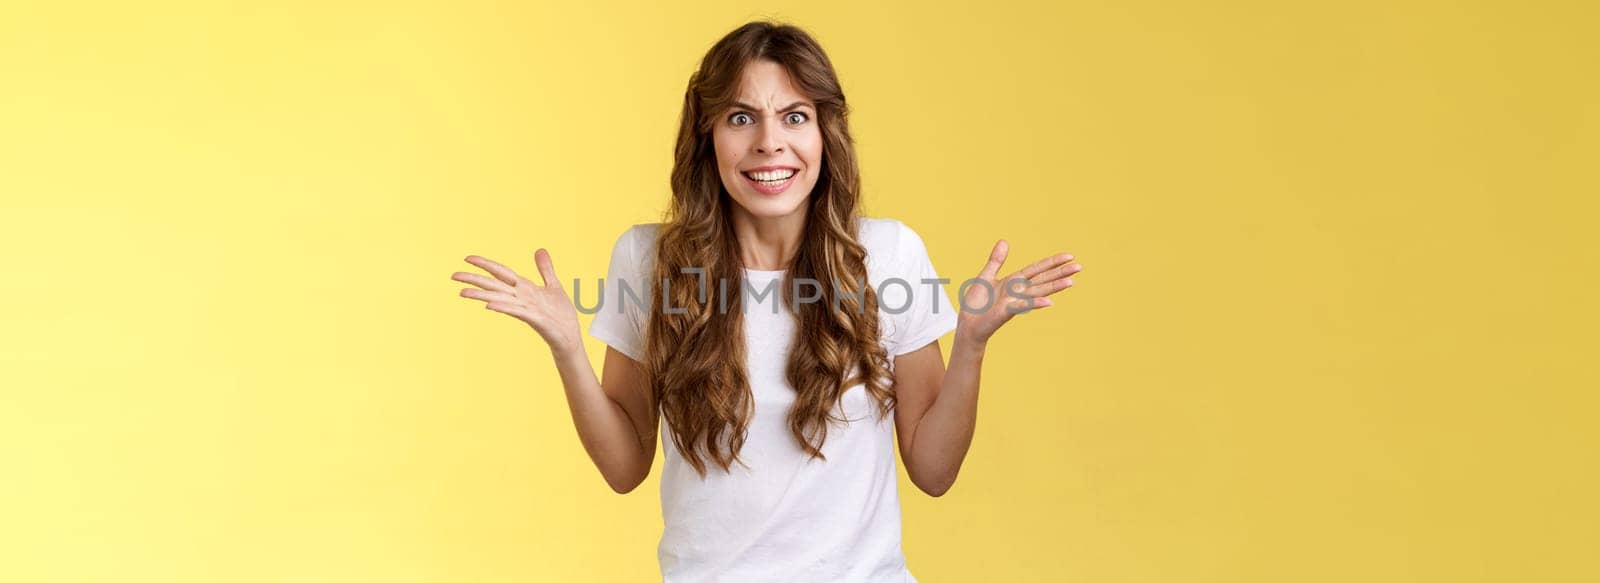 Angry freaked out disappointed woman frowning grimacing anger distress raise hands sideways full dismay complaining being rude arguing look pissed outraged swearing frustrated yellow background.